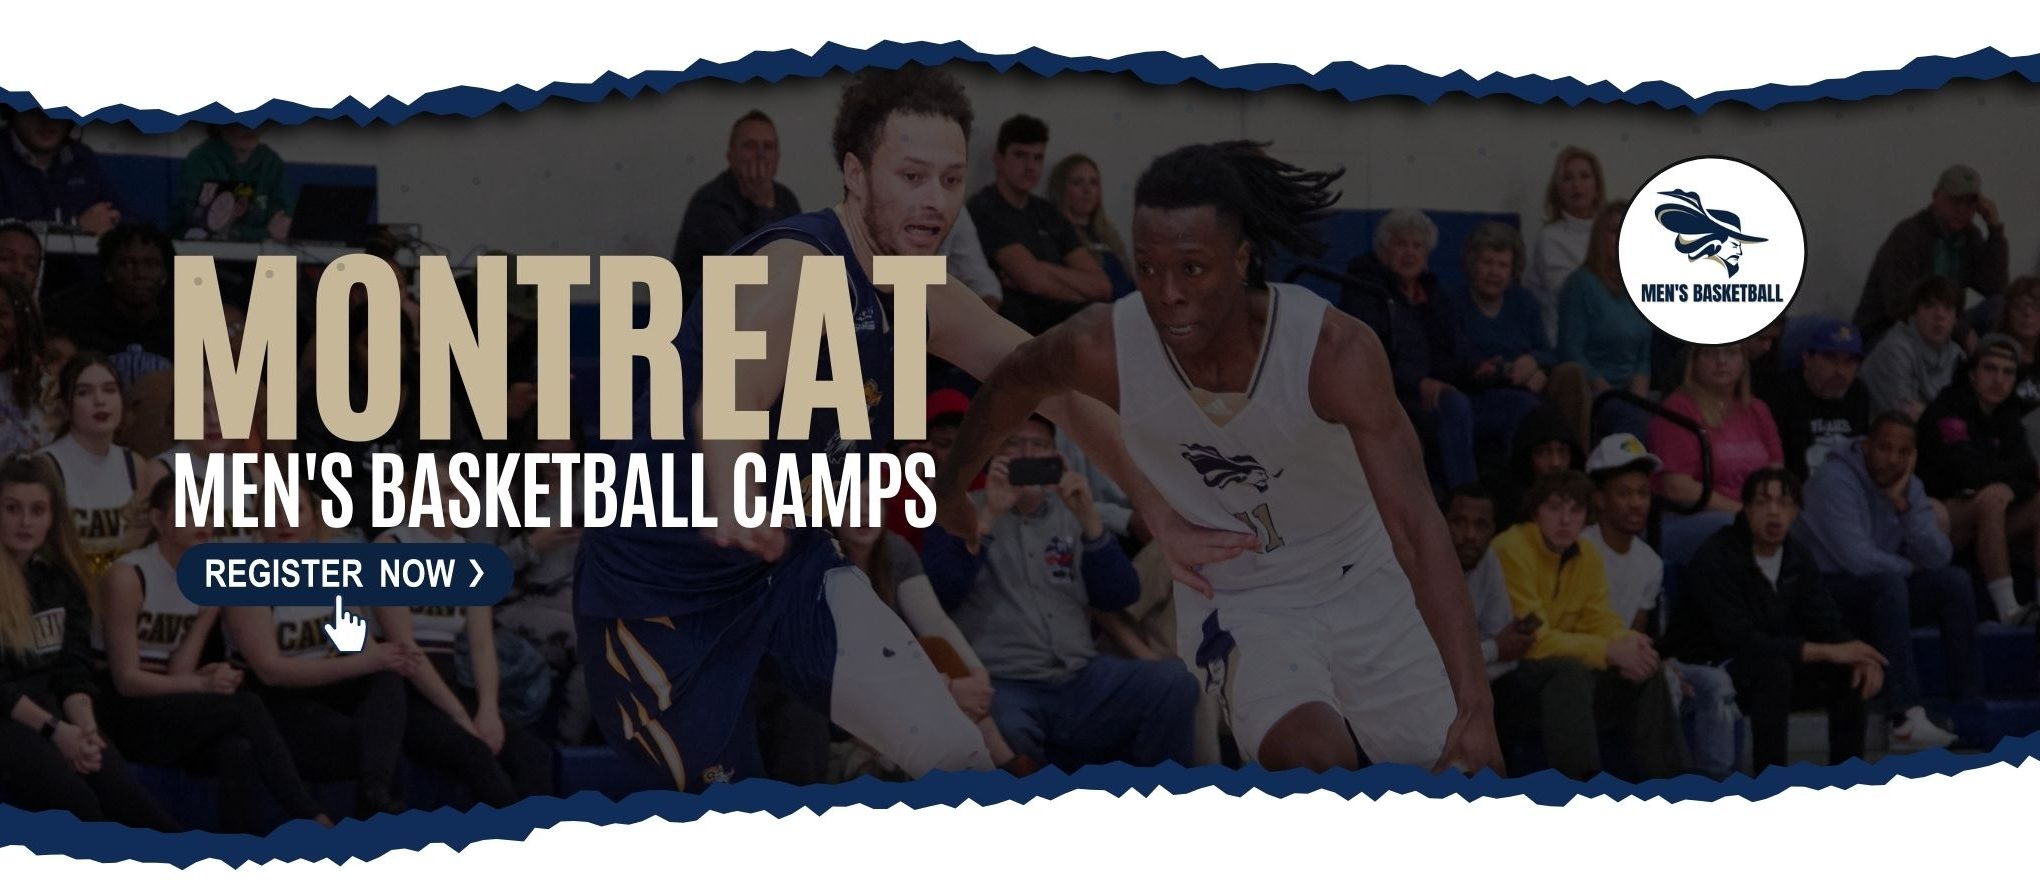 Montreat Mens Basketball Camps